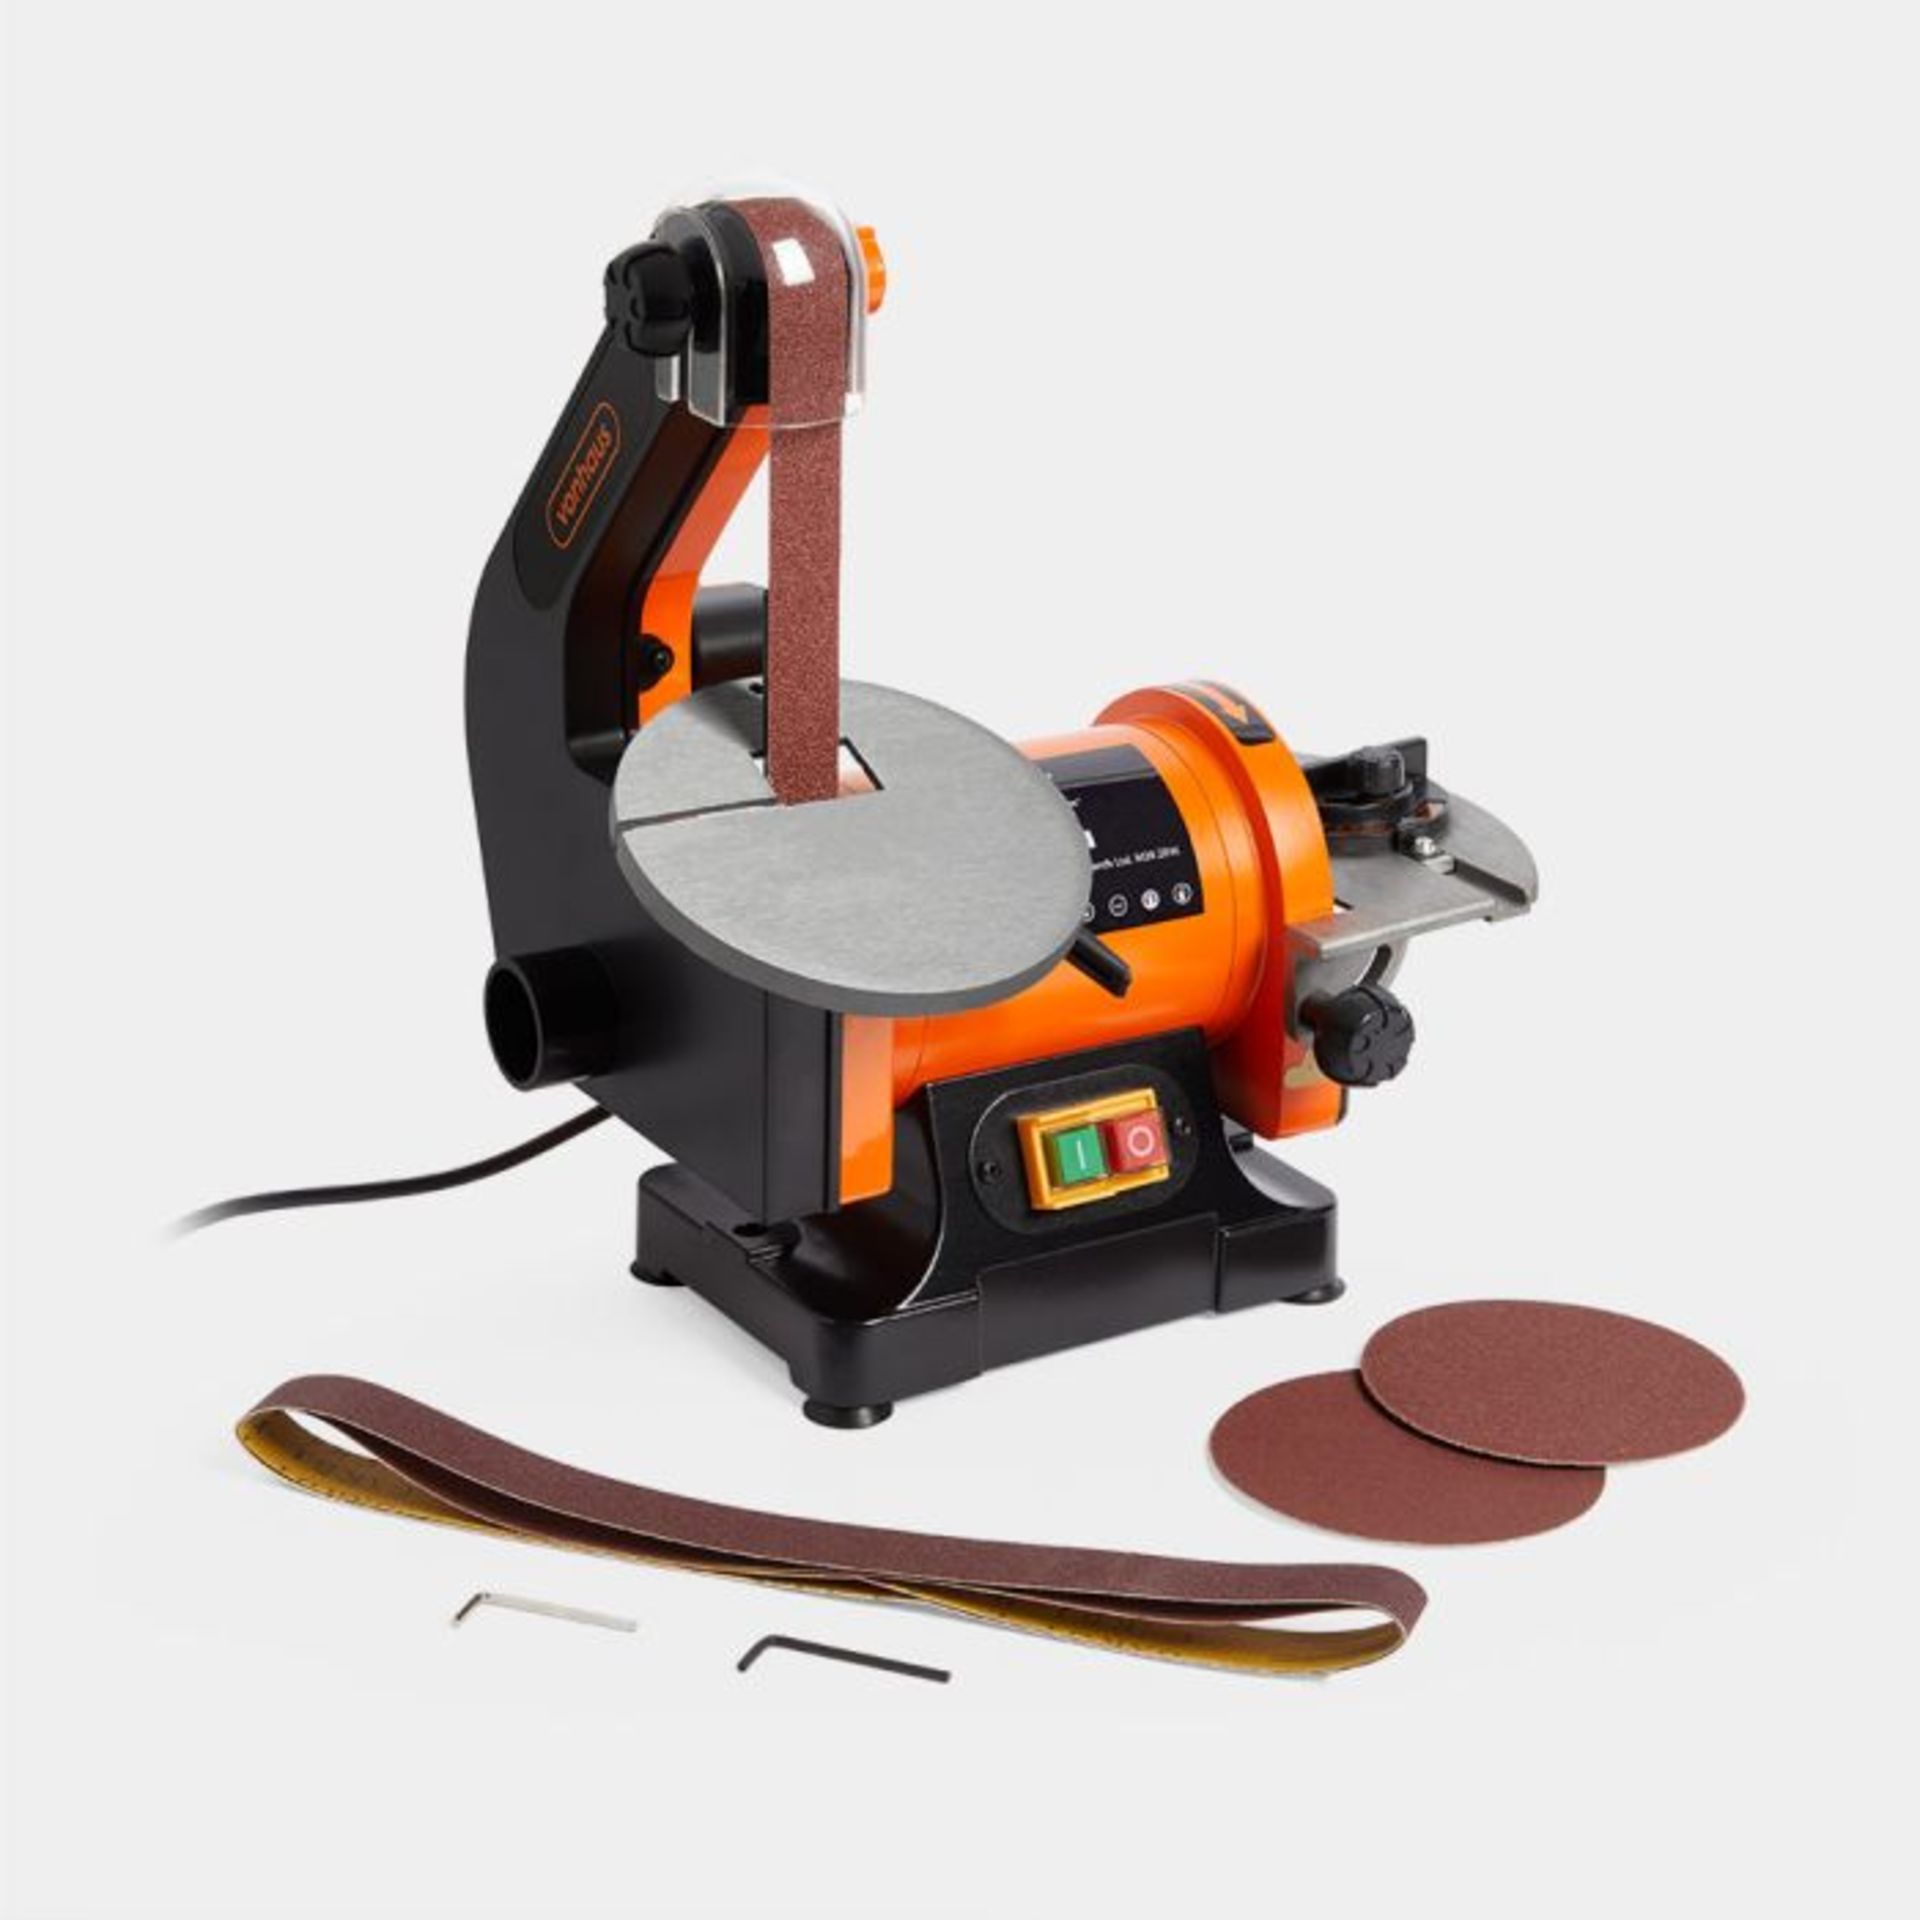 25 x 760mm Belt/ 125mm Disc Sander. - PW. Helping you get perfect results, this belt and disc sander